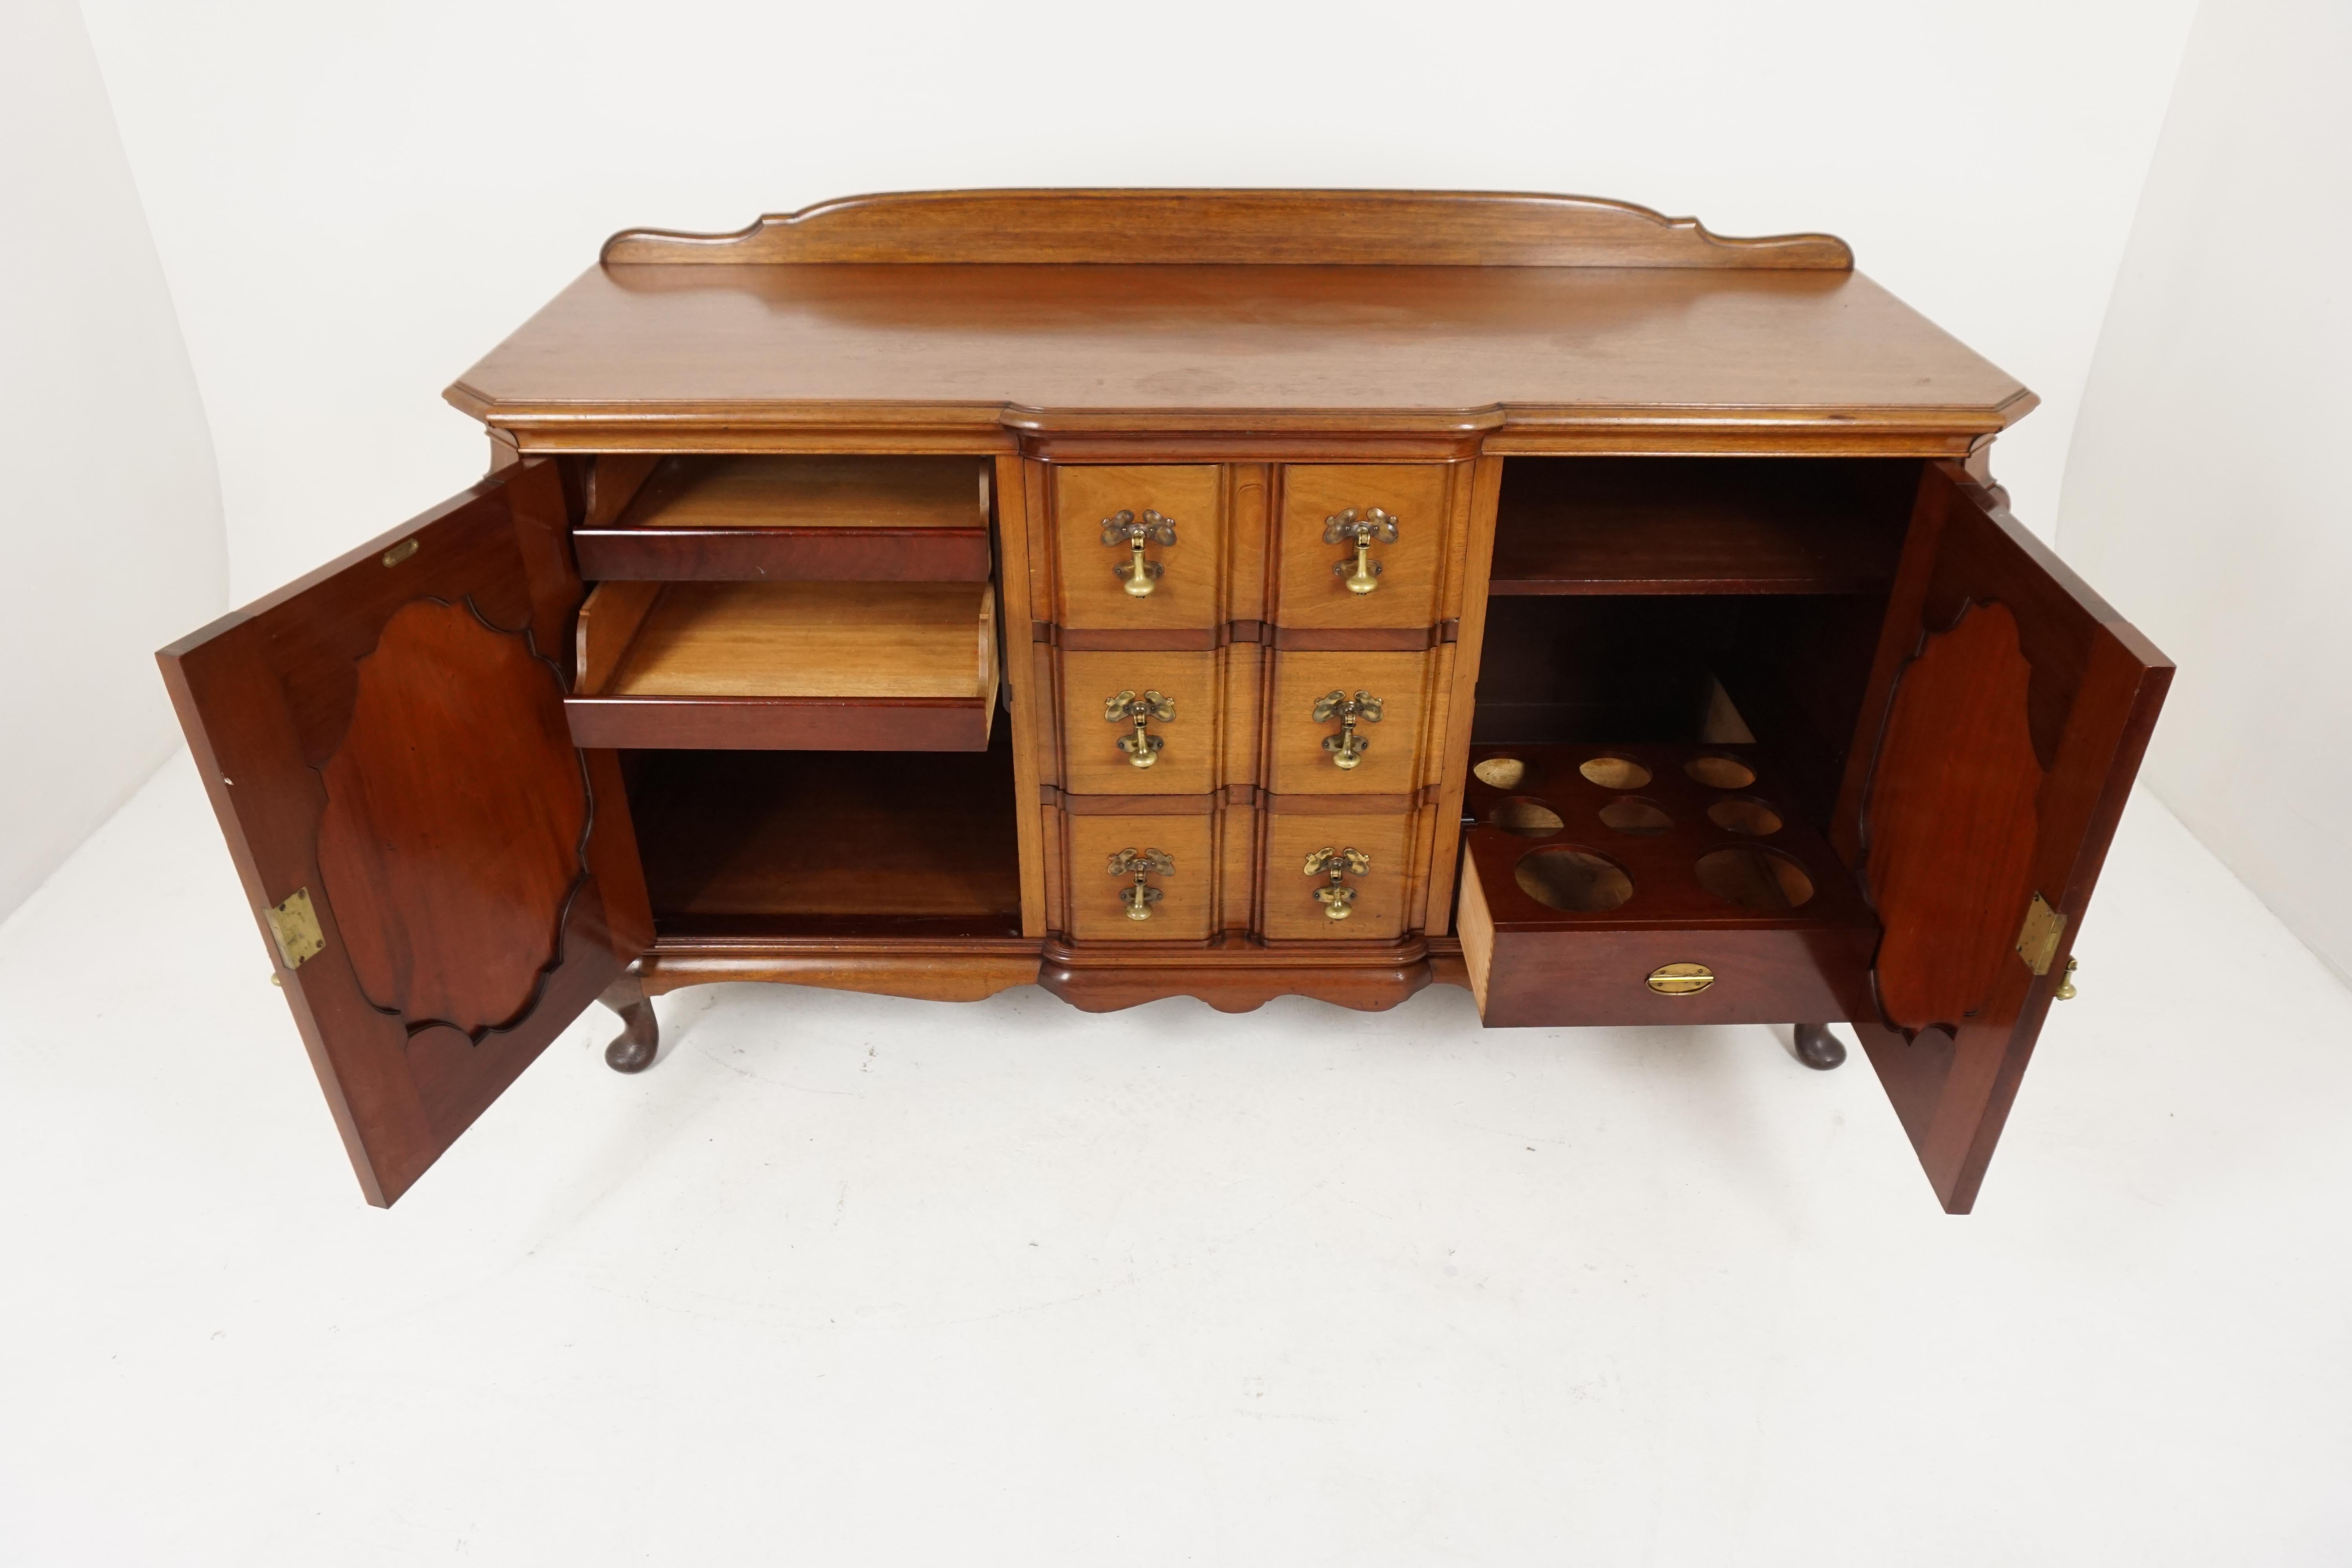 Antique walnut sideboard, carved buffet or chiffonier, by James Laird & Son in Glasgow, antique furniture, Scotland, 1920, H073

Scotland, 1920
Solid walnut
Original finish
Pediment to the back
Moulded top
Three drawers below
Flanked by a pair of